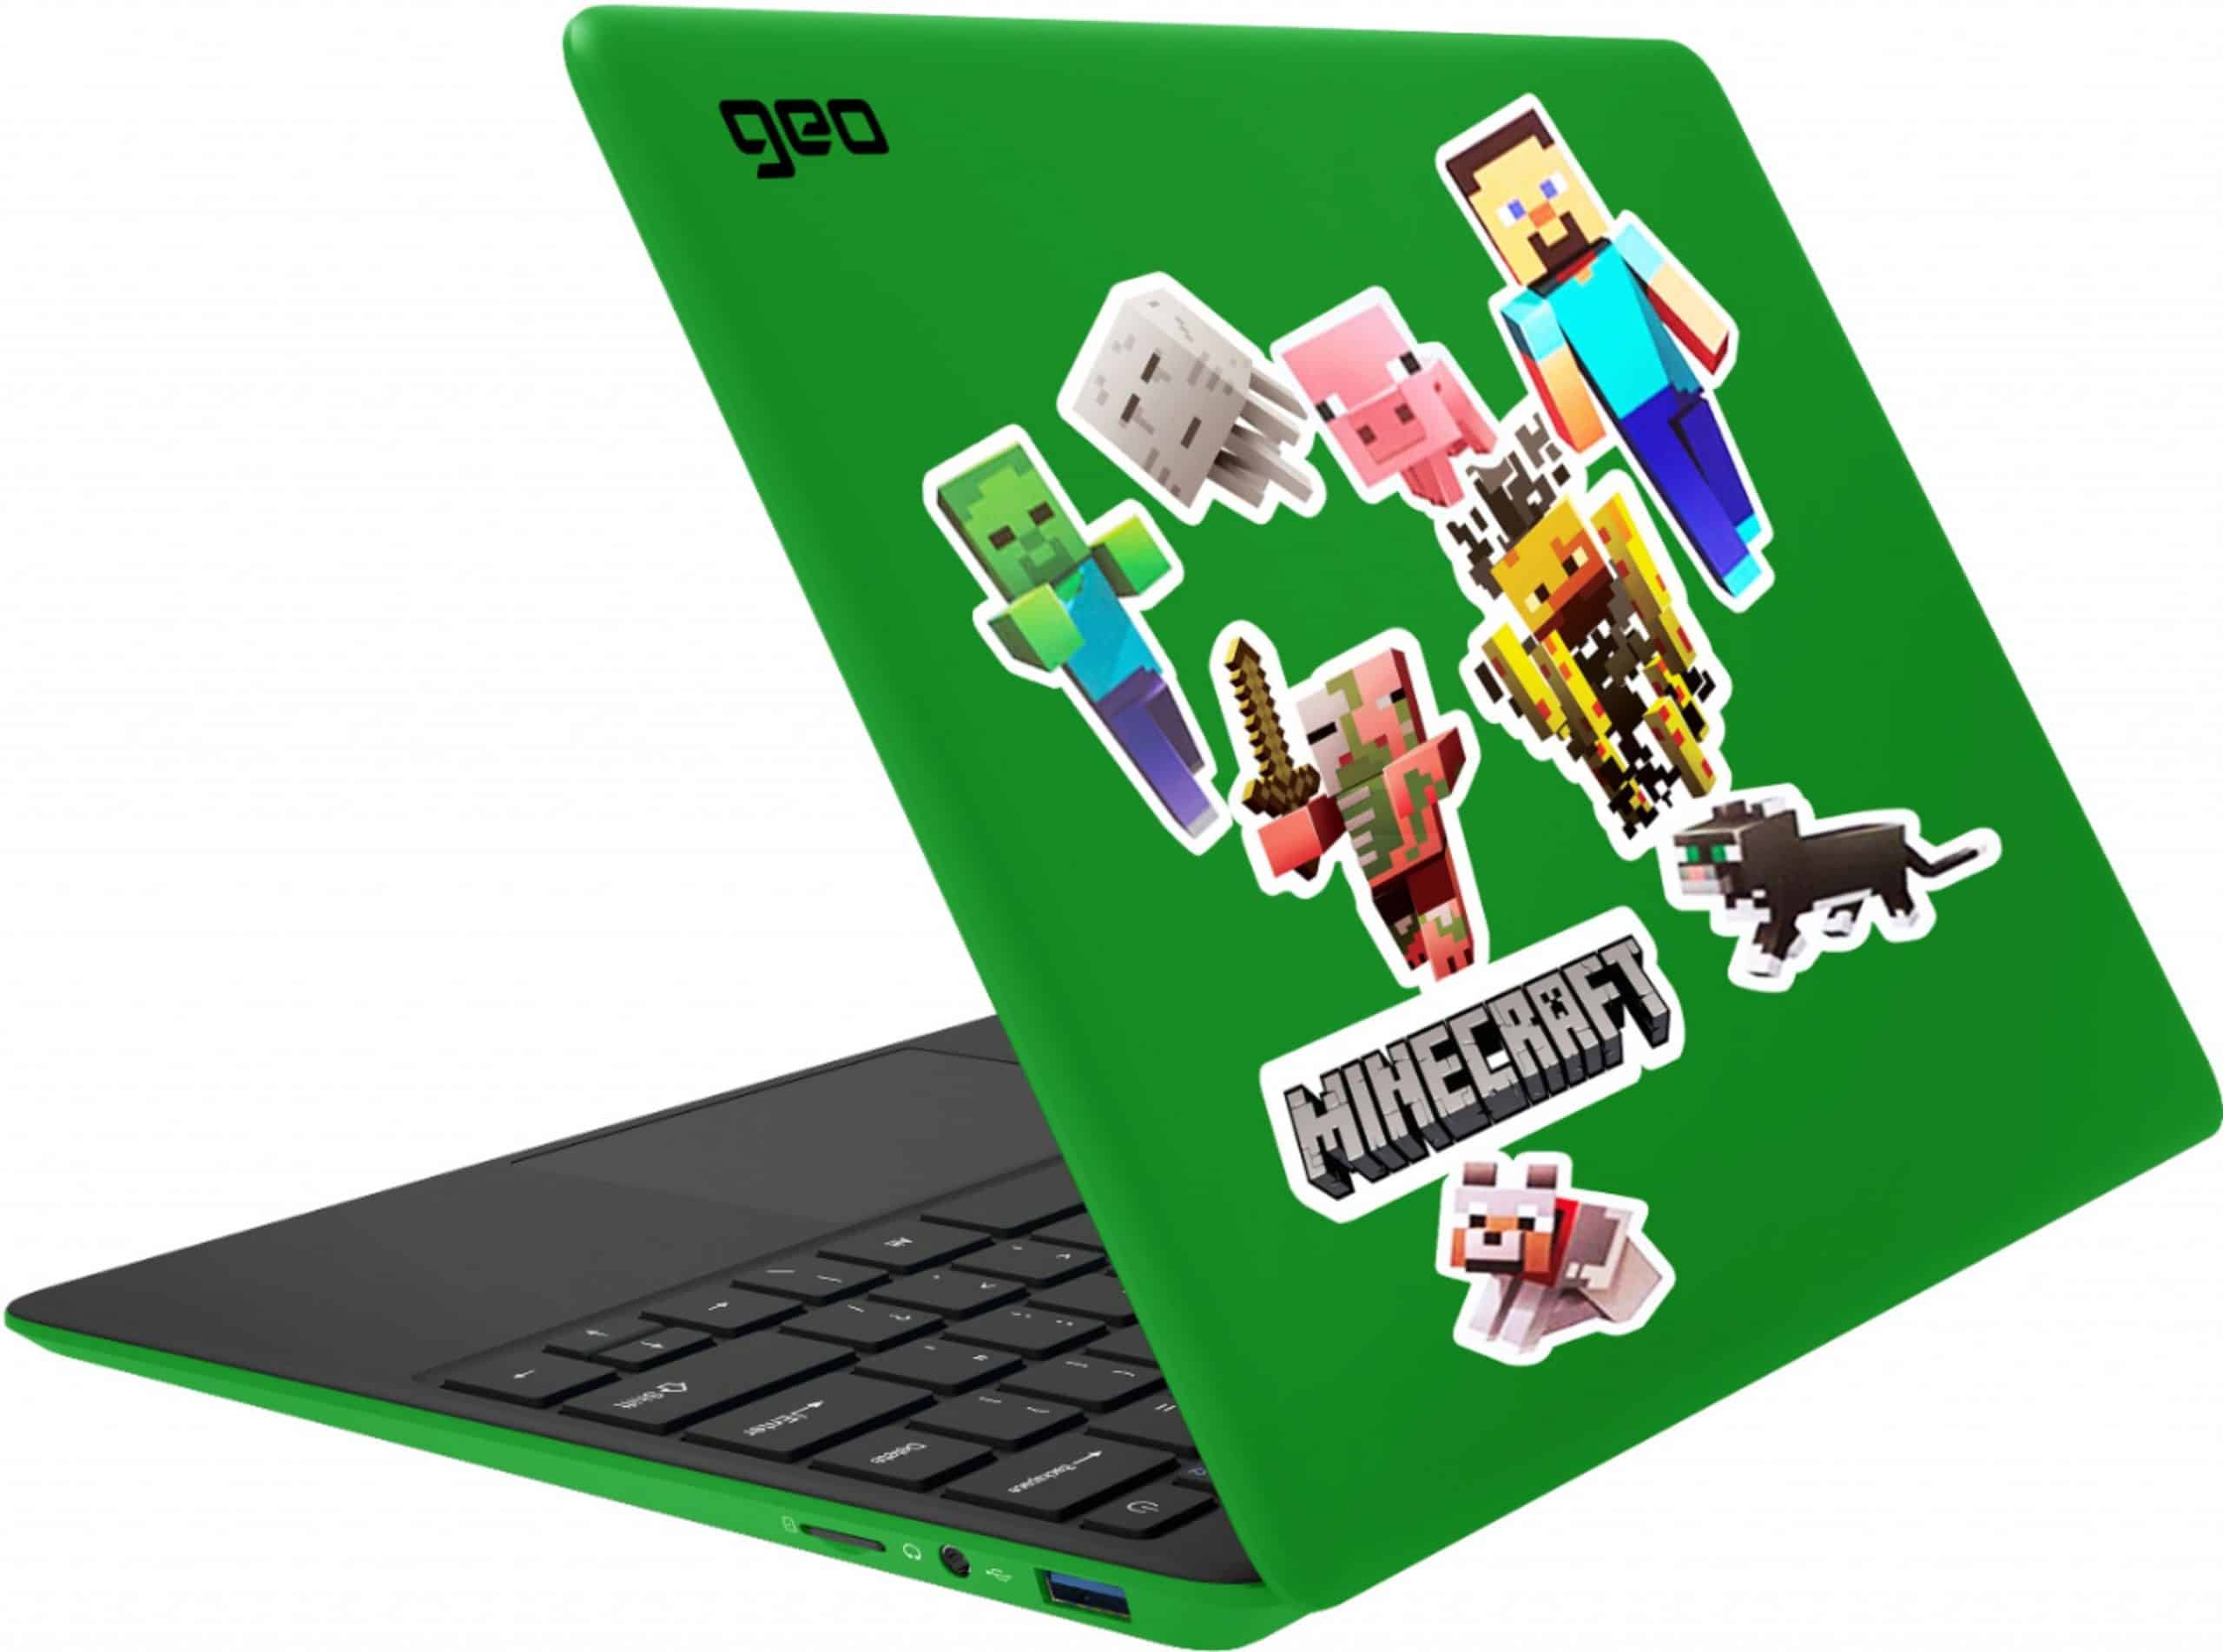 GeoBook 120 Minecraft Edition Windows 10 laptop now available from Best Buy